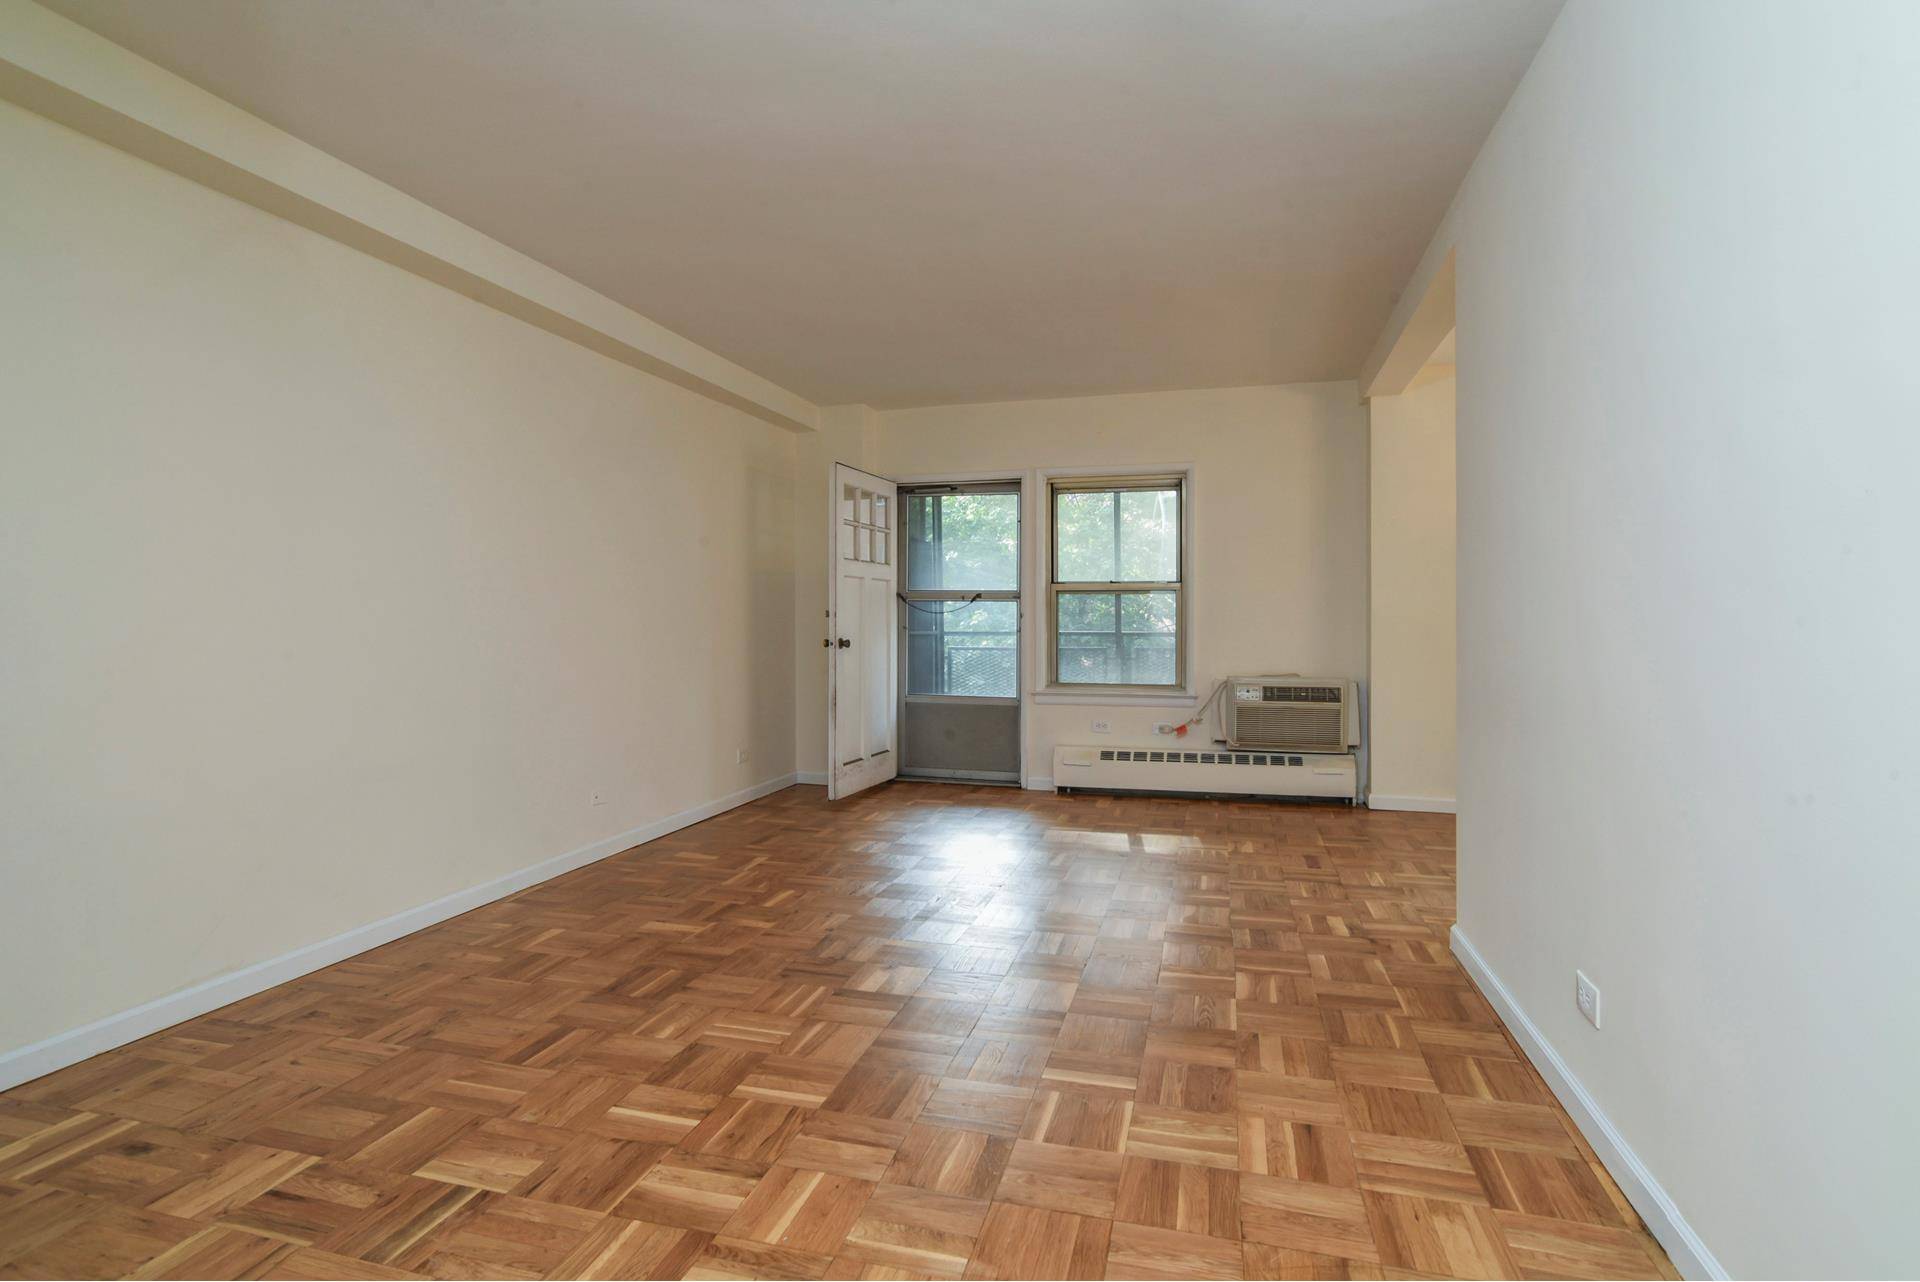 This bright and spacious 3 bedroom, 2 full bath apartment has South and West facing exposures for great light.